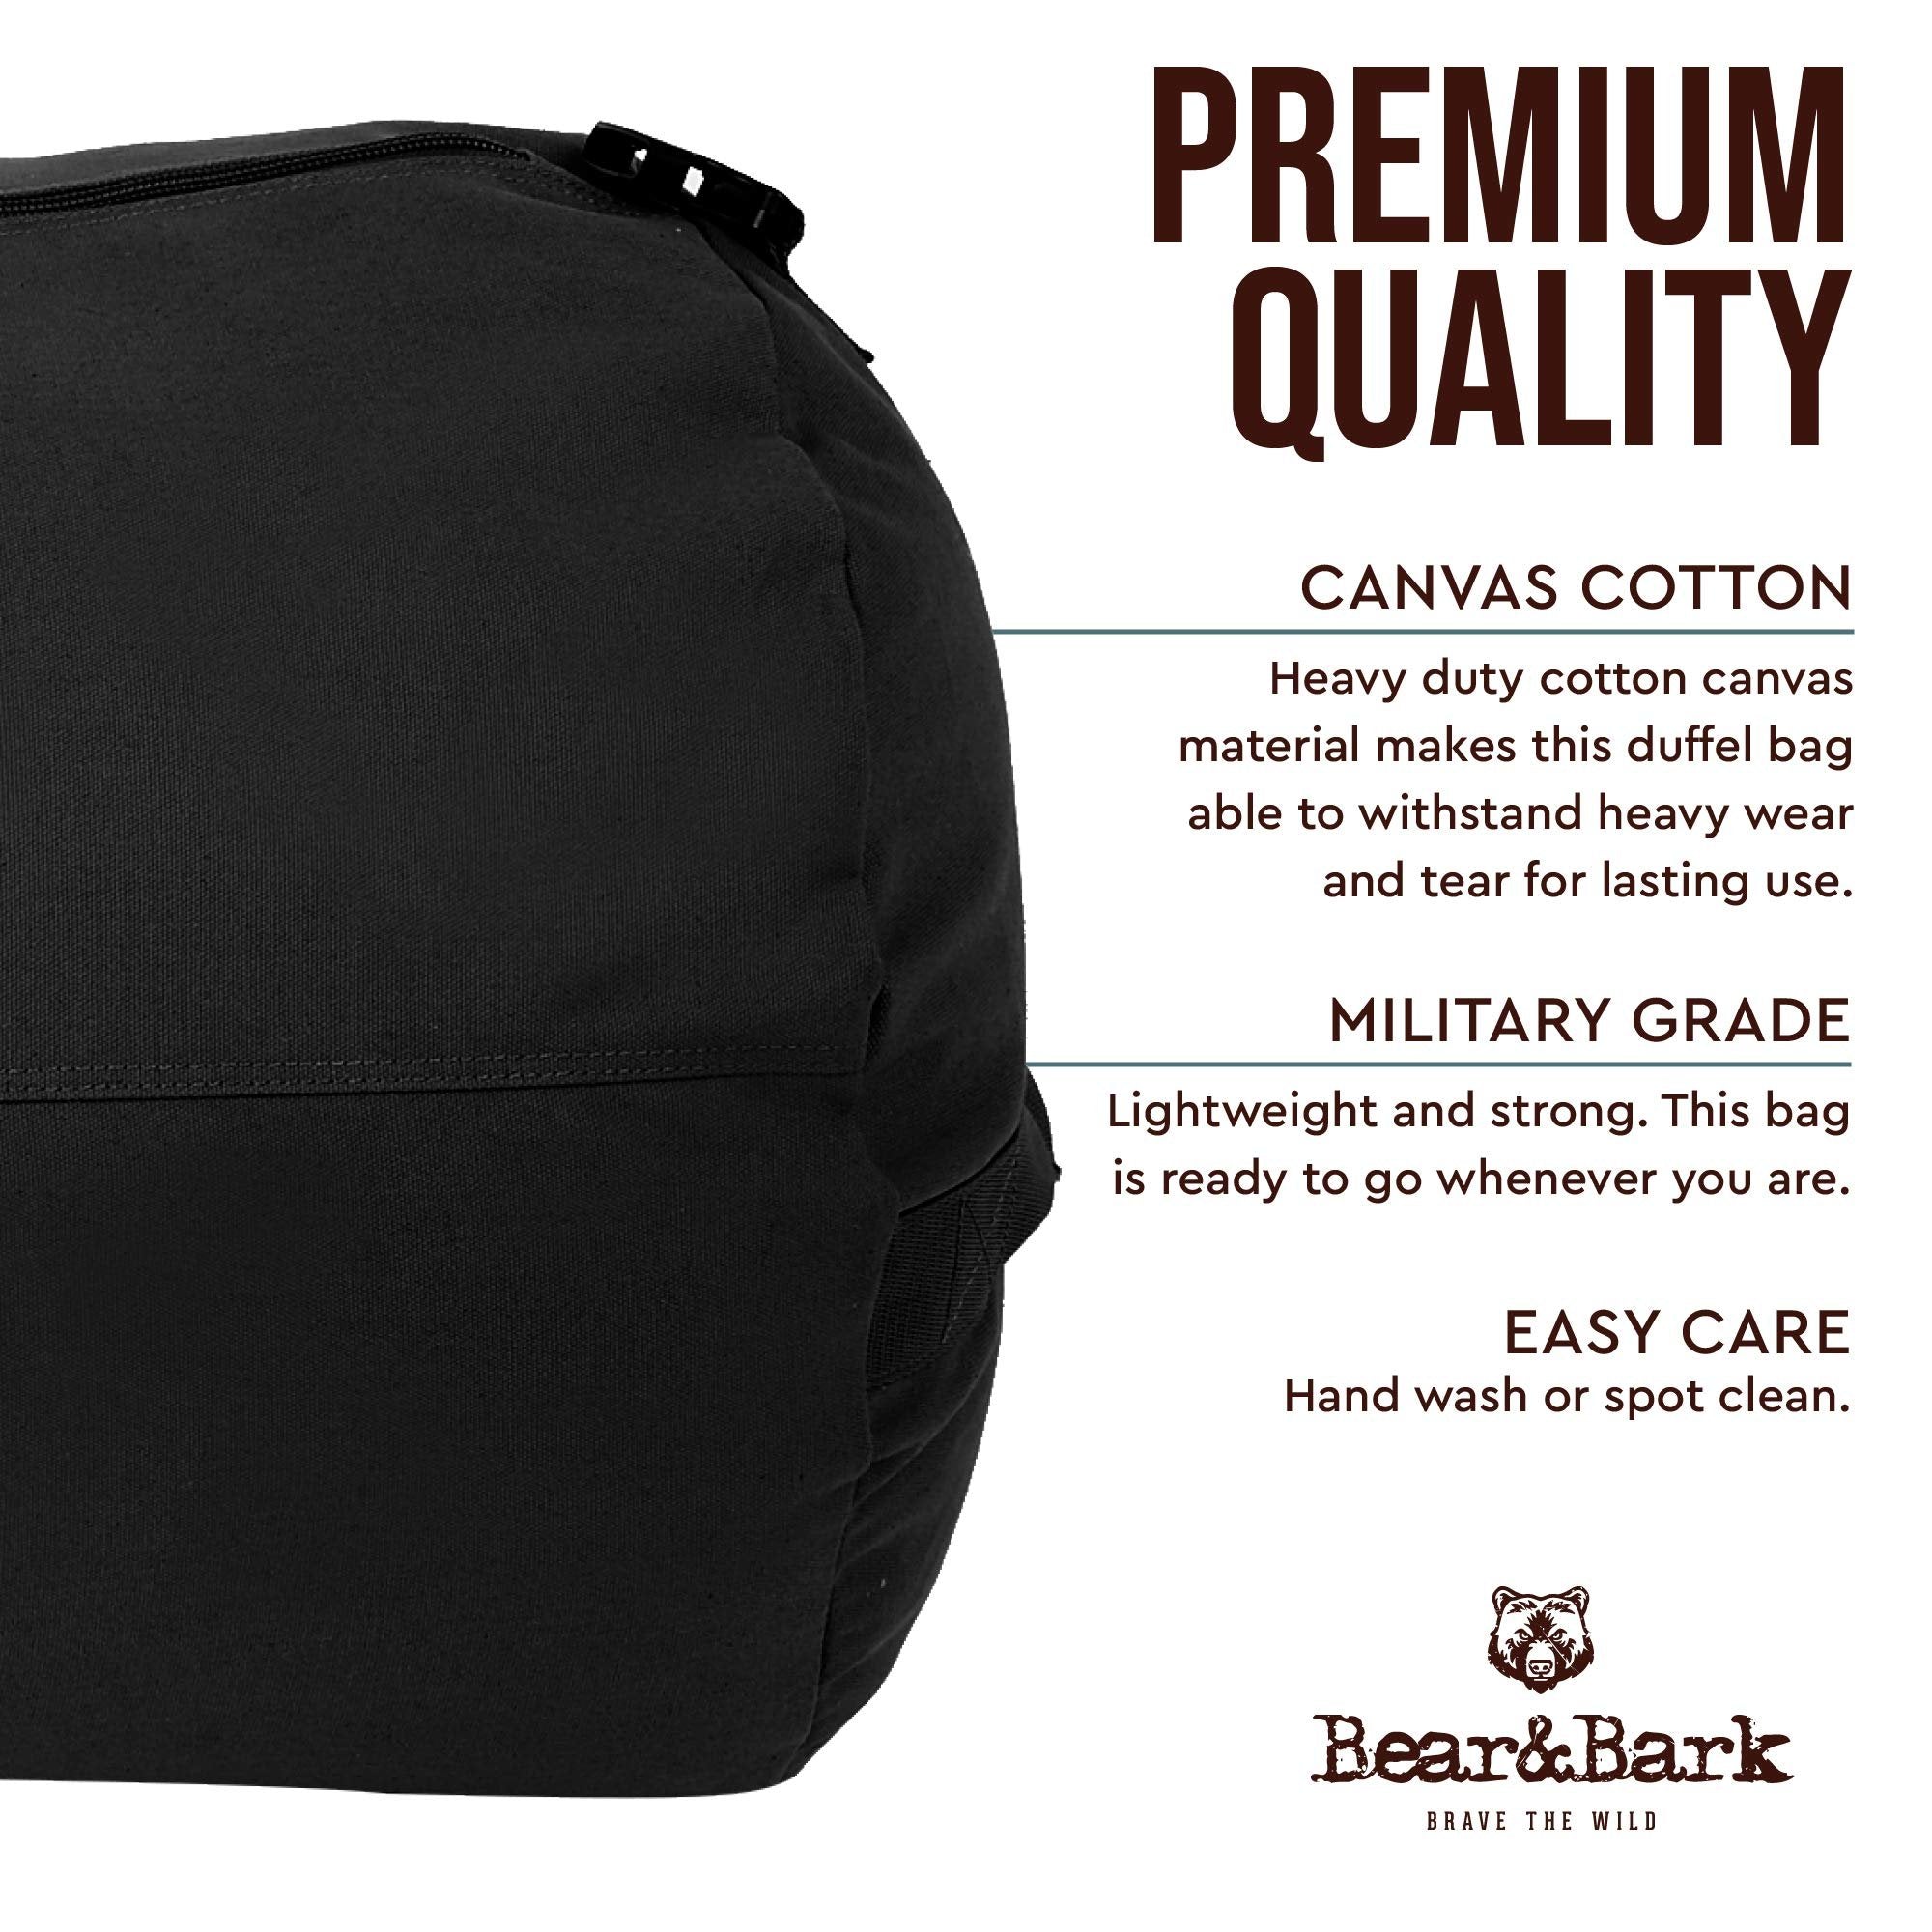 Black Canvas Duffle Bag 133.4L - Standard 32X18 Size - Military Style for Gym, Travel, and Storage